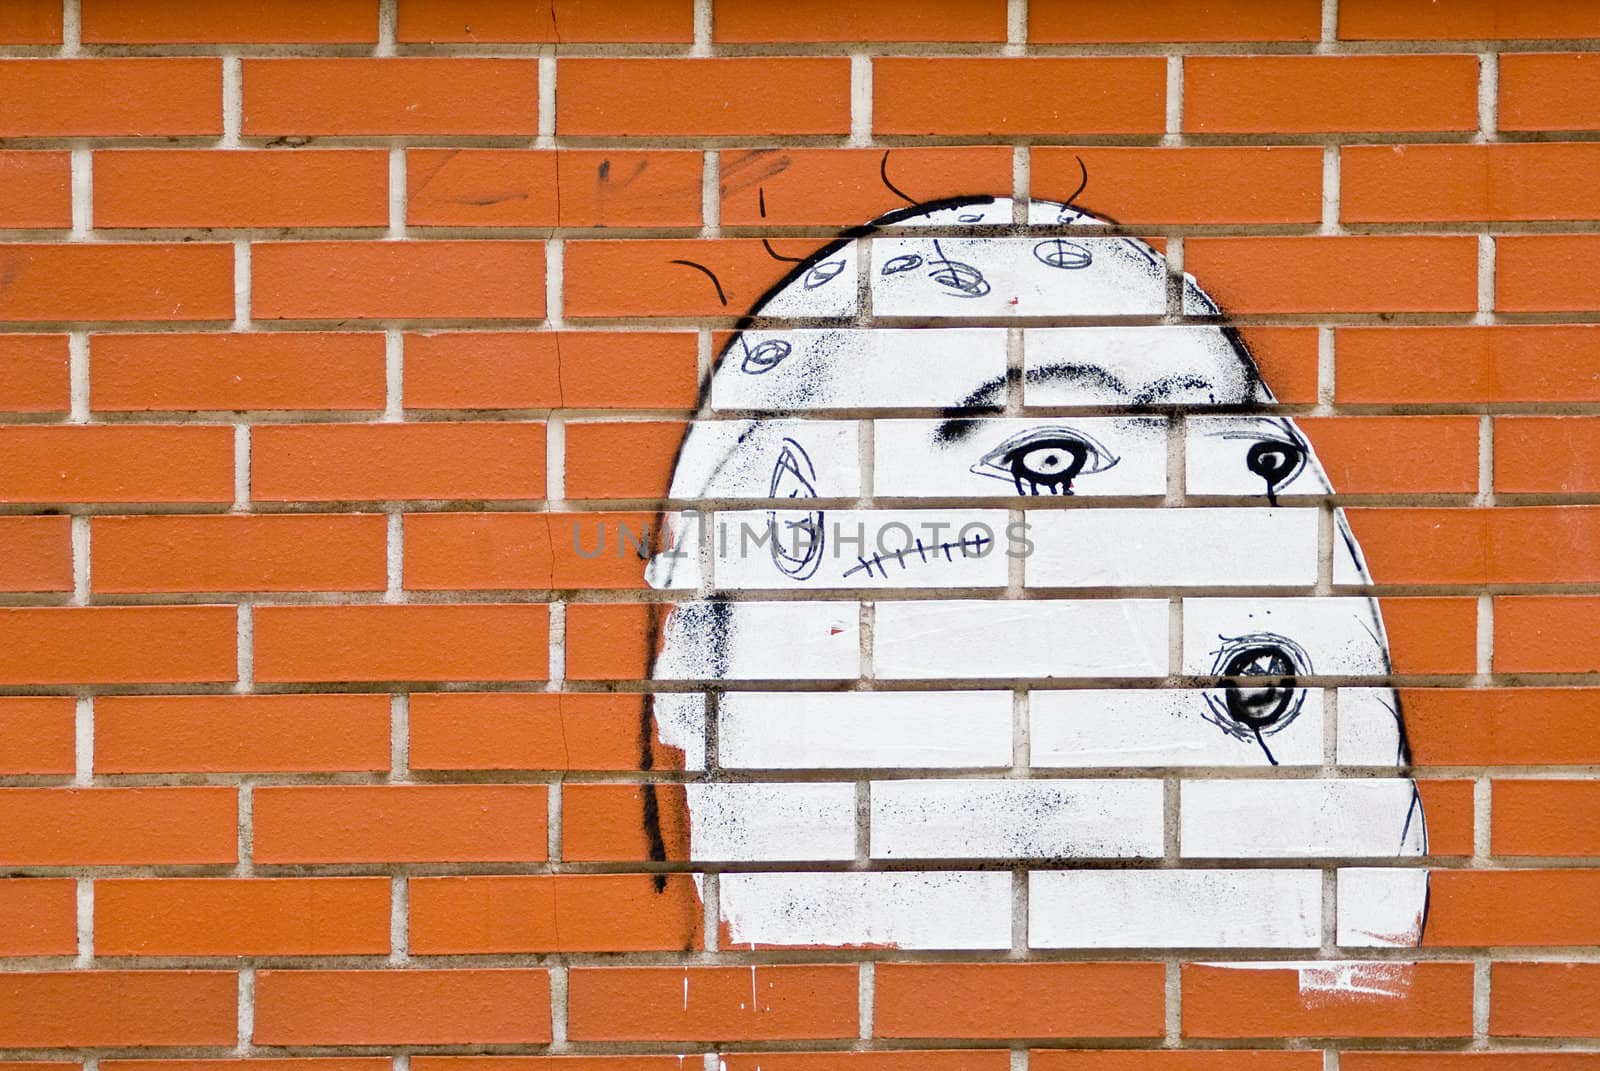 a brickwall with a graffiti showing an ugly white face